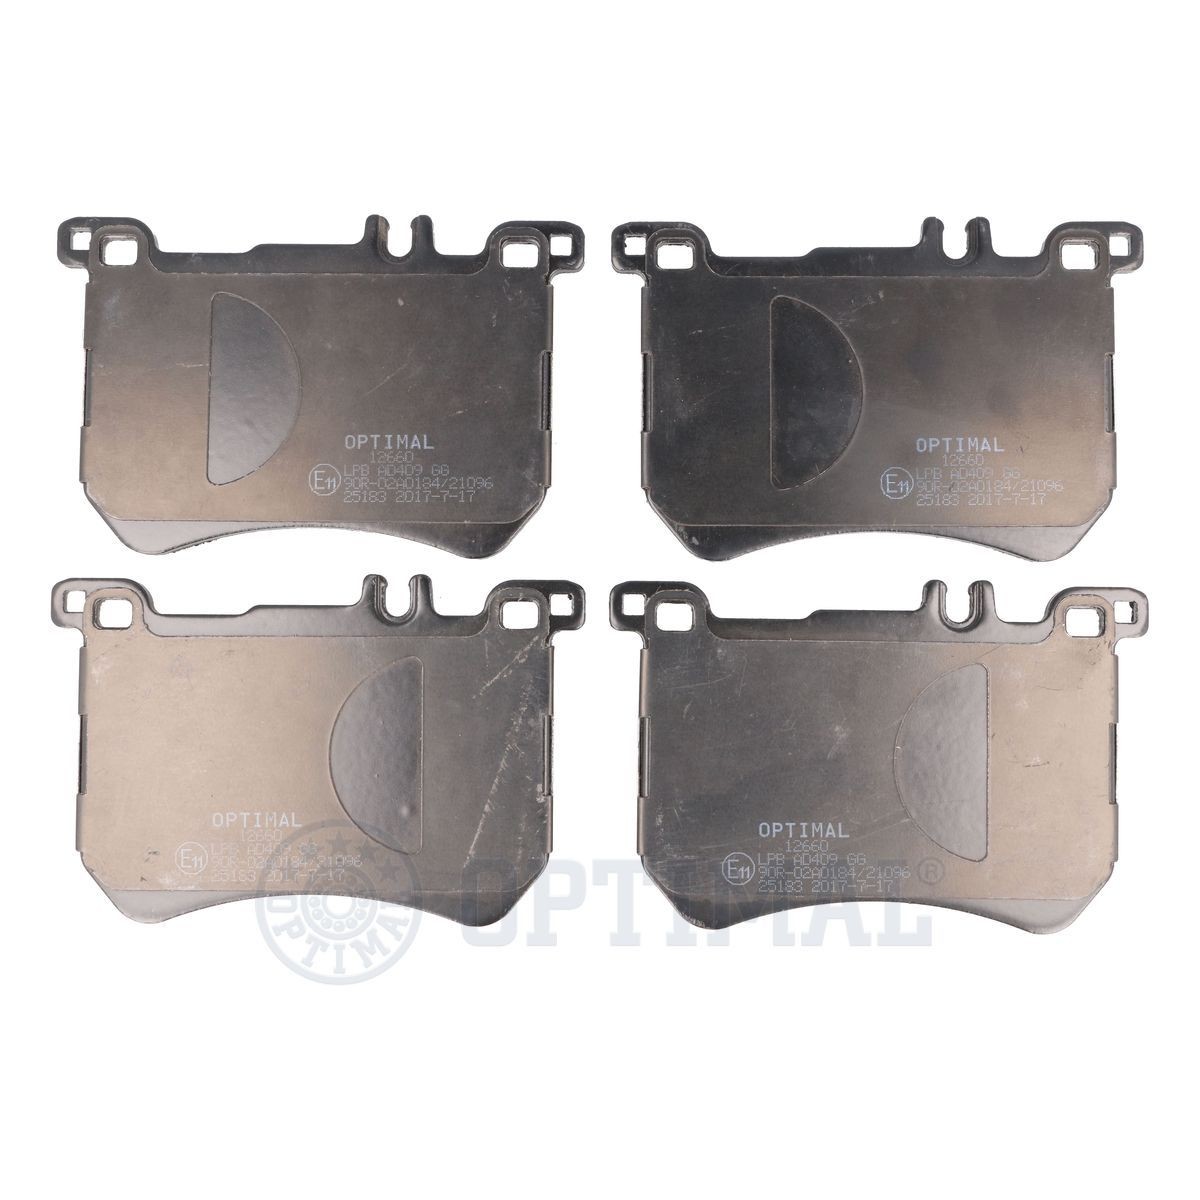 OPTIMAL BP-12660 Brake pad set Front Axle, prepared for wear indicator, excl. wear warning contact